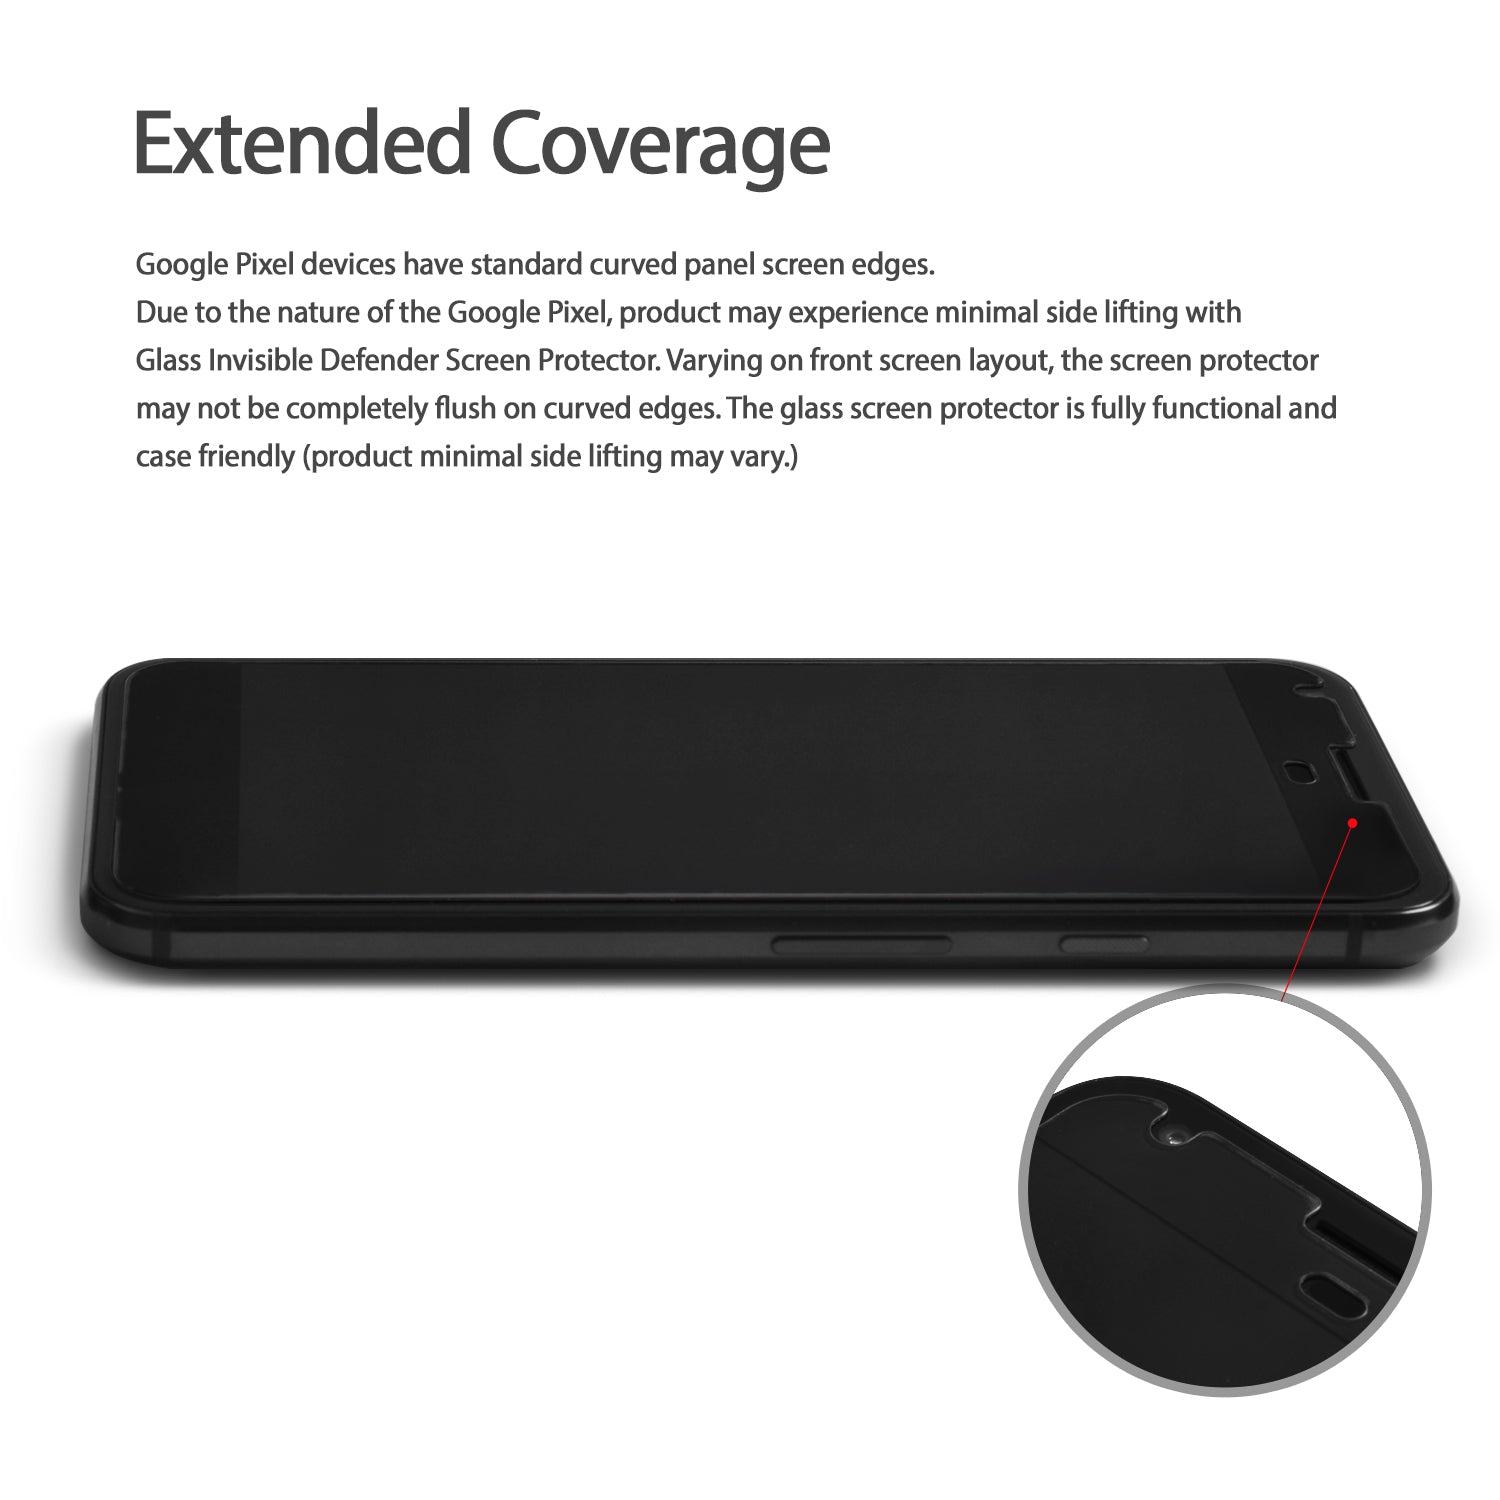 Google Pixel Screen Protector | Invisible Defender Glass - Extended Coverage